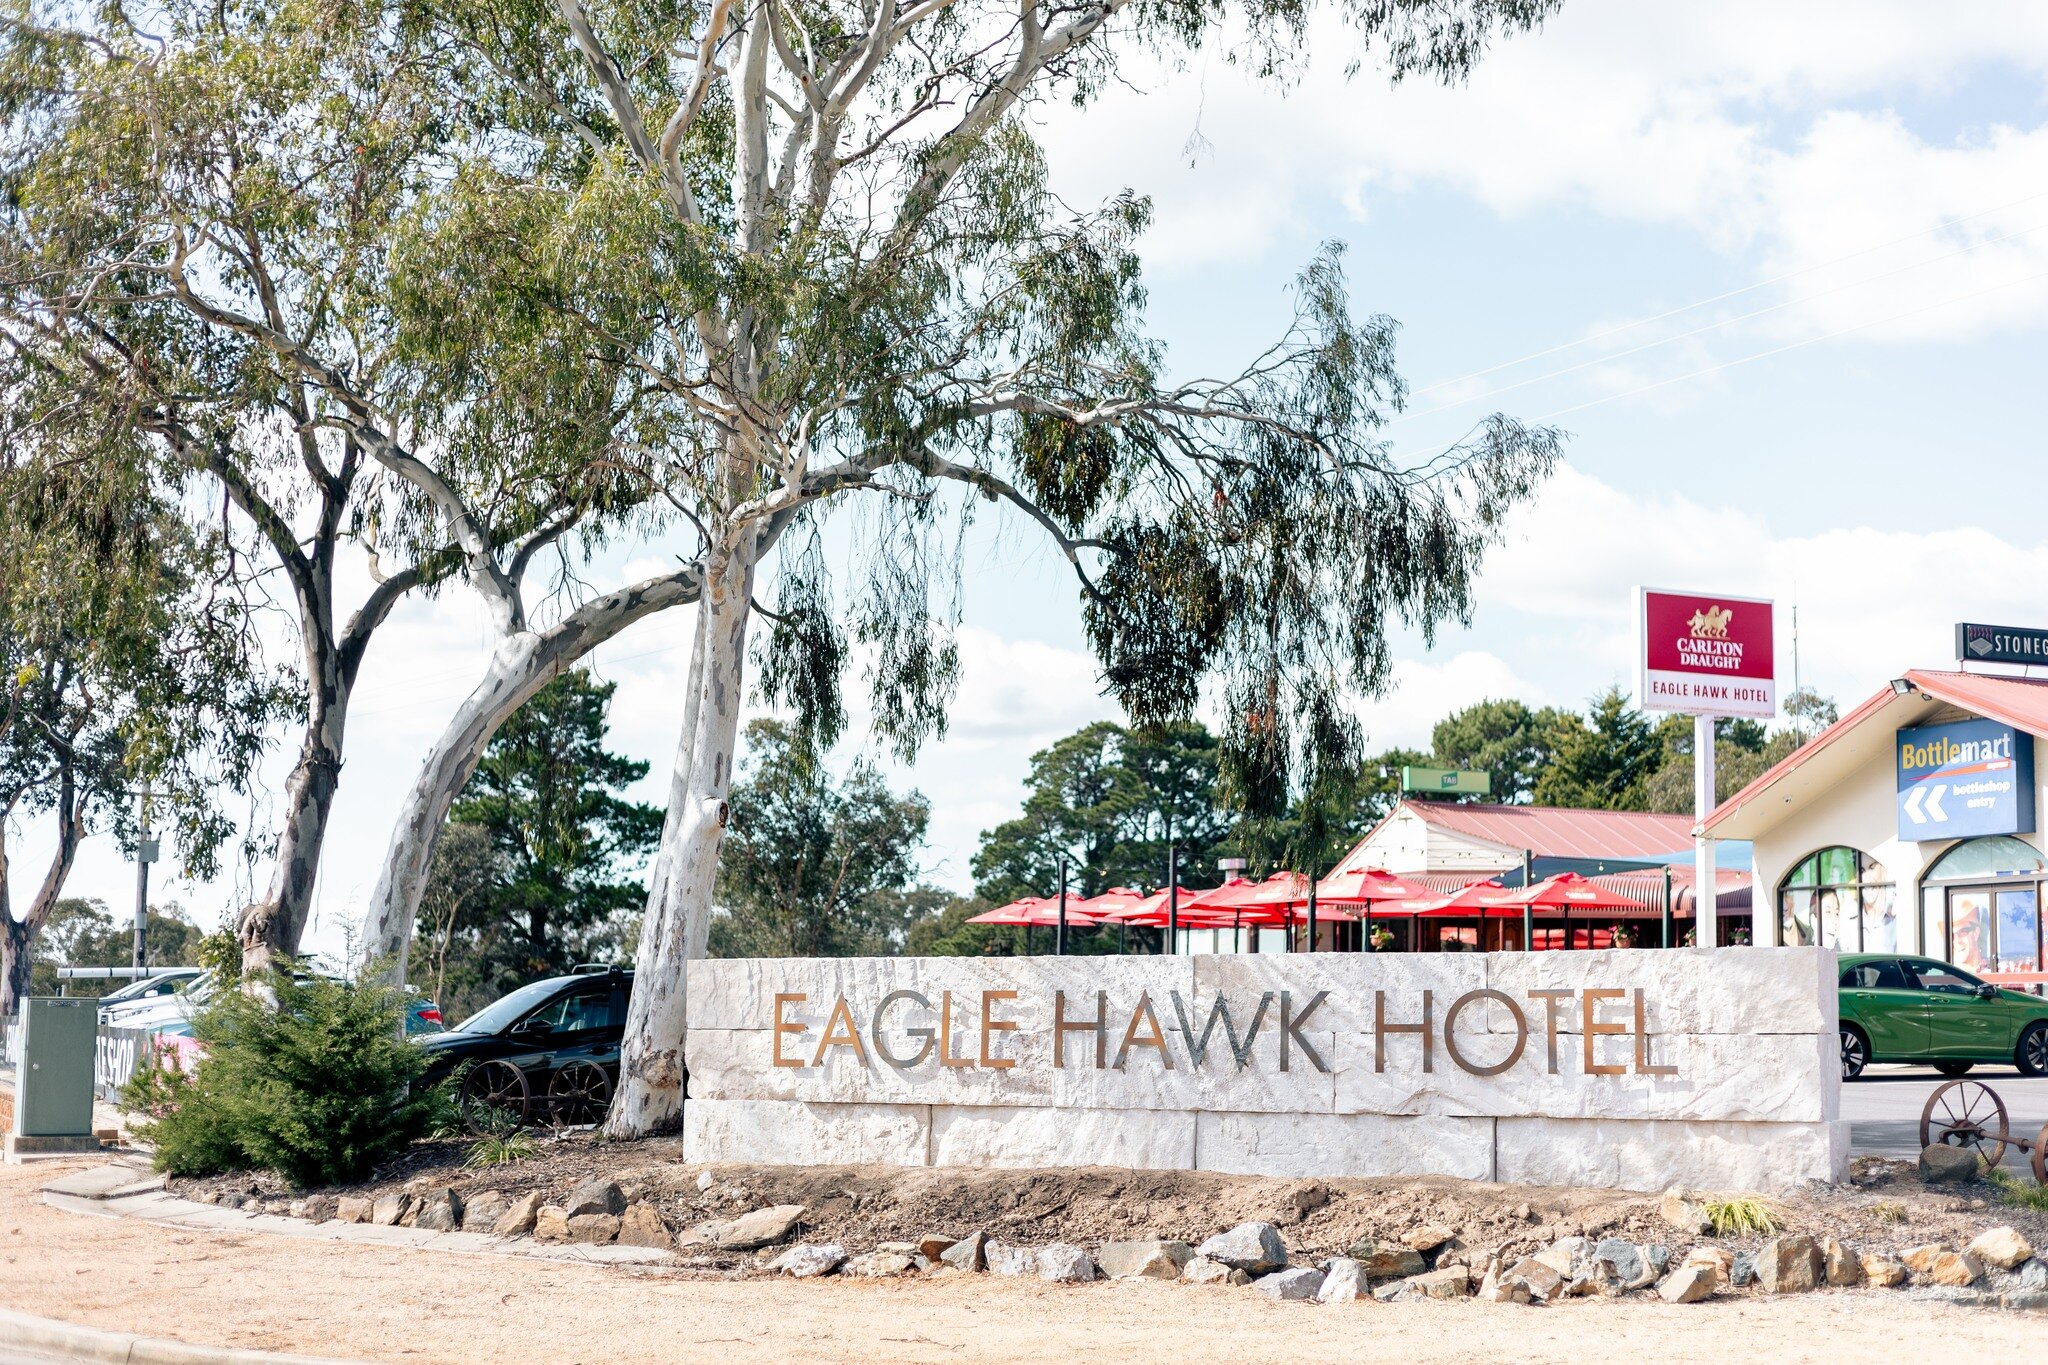 Our food and entertainment are sure to make your next gathering with family or friends one for the books. From tasty eats, and fun activities - it's all here at the Eagle Hawk.

Come join in on the memories-in-the-making! Call us on 6241 6225, or vis